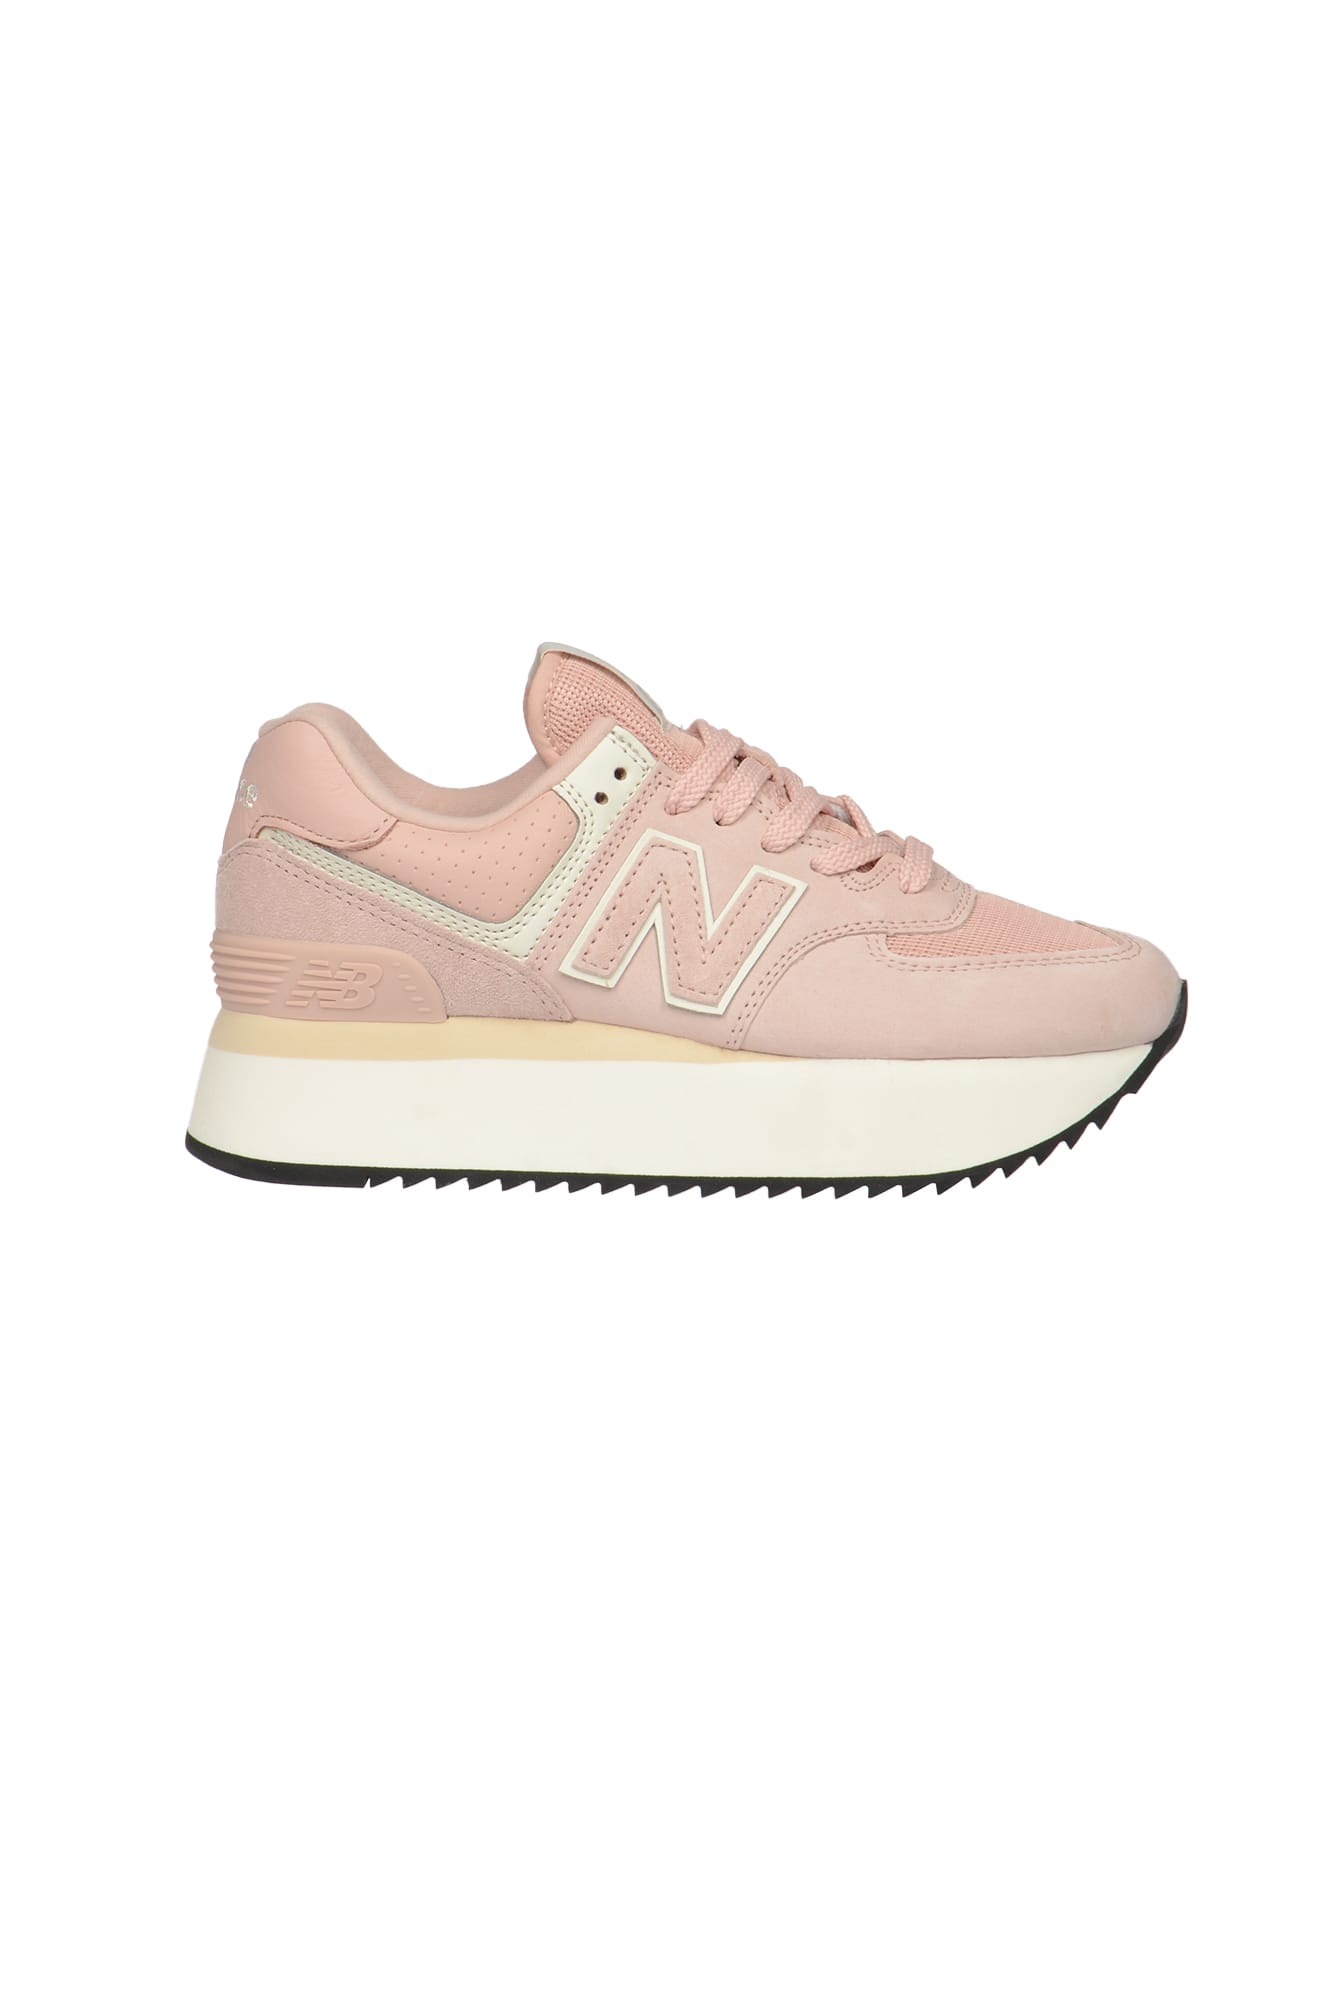 New Balance Logo Patched Wedge Sneakers